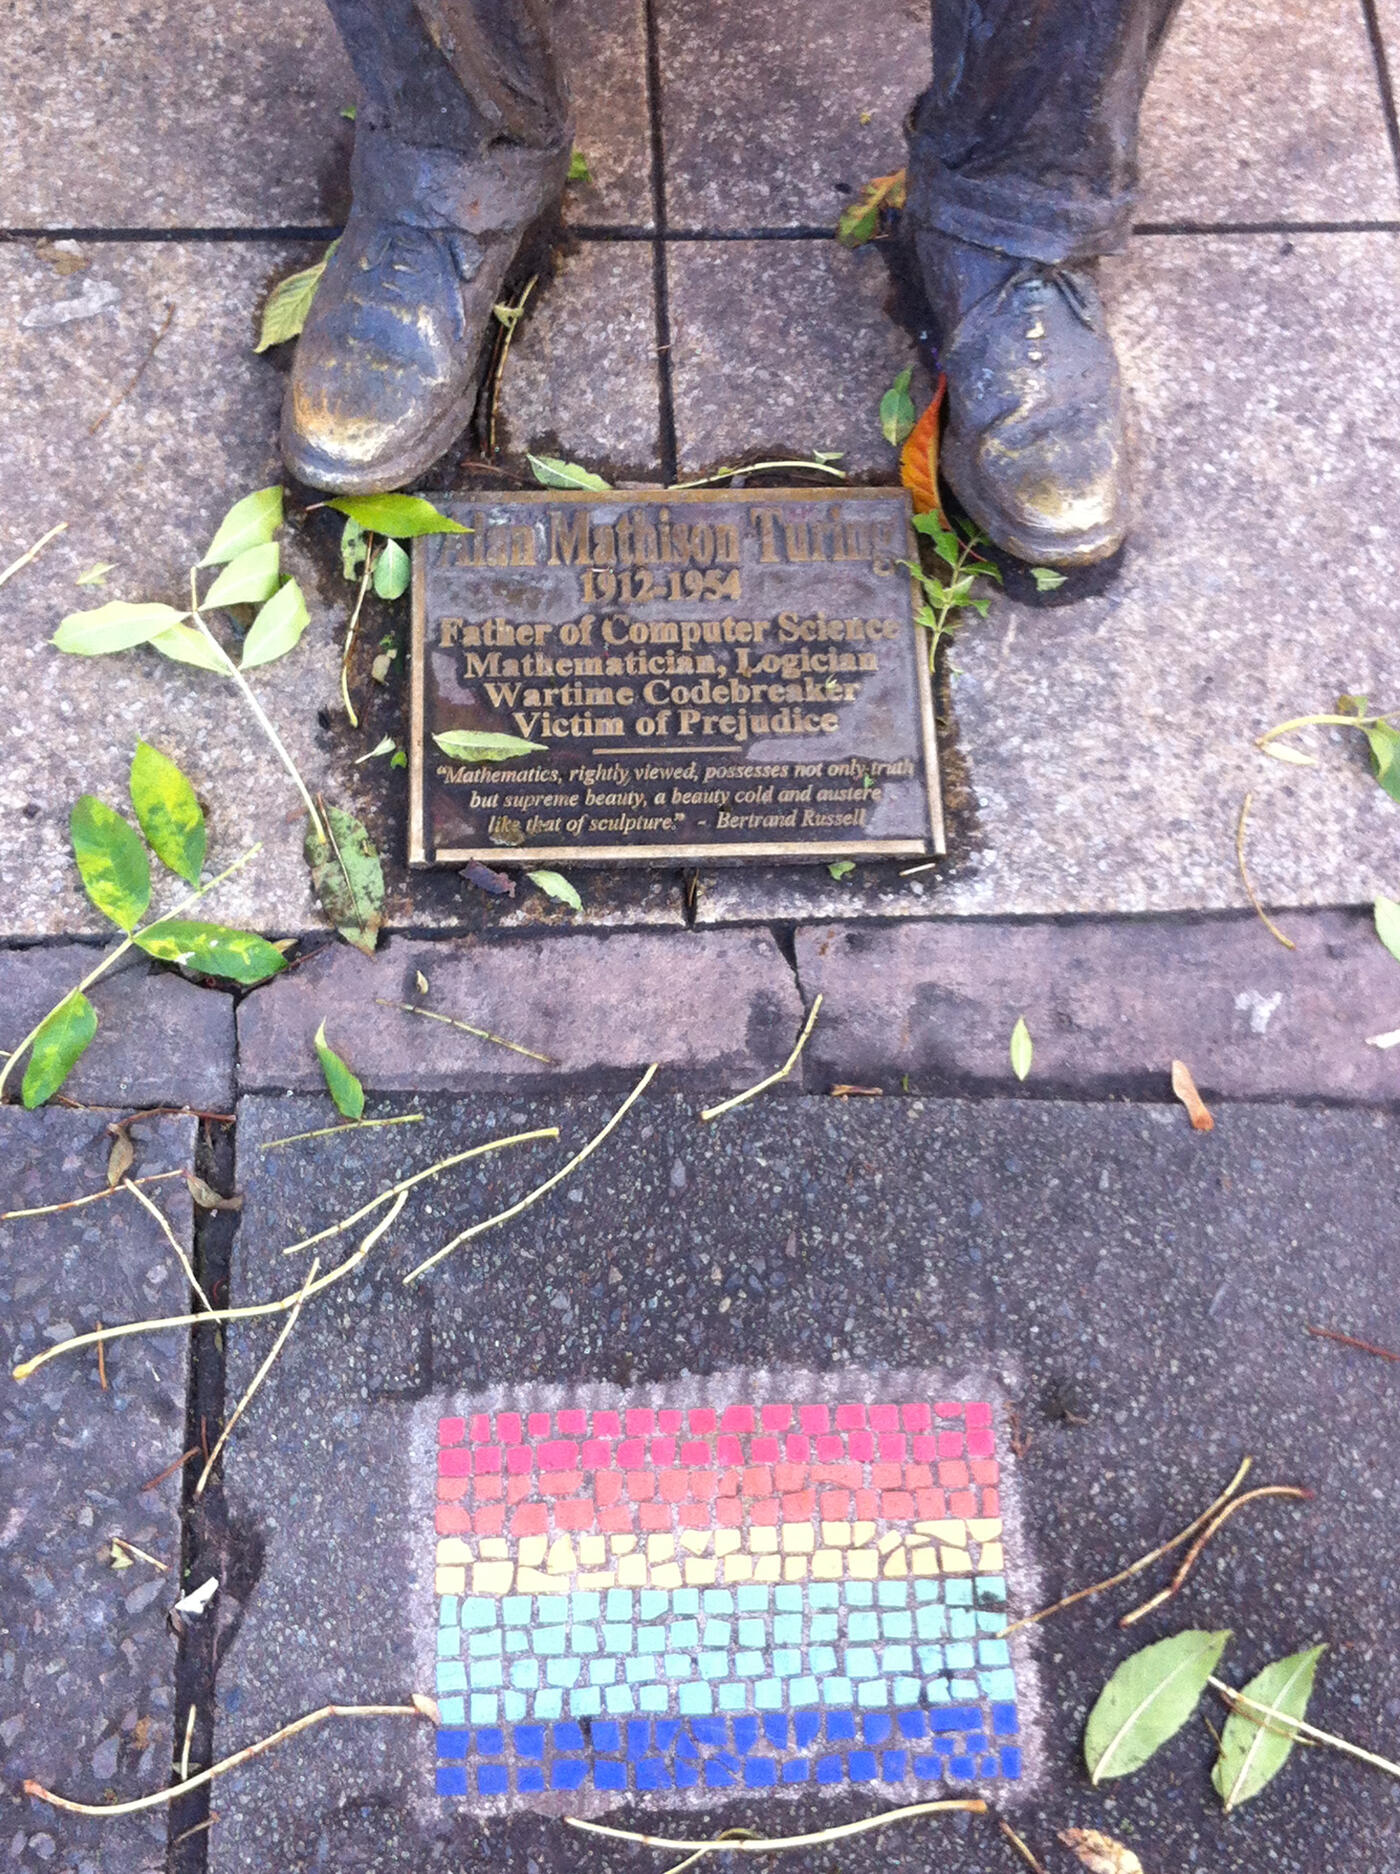 Plaques at the feet of the Alan Turing Memorial